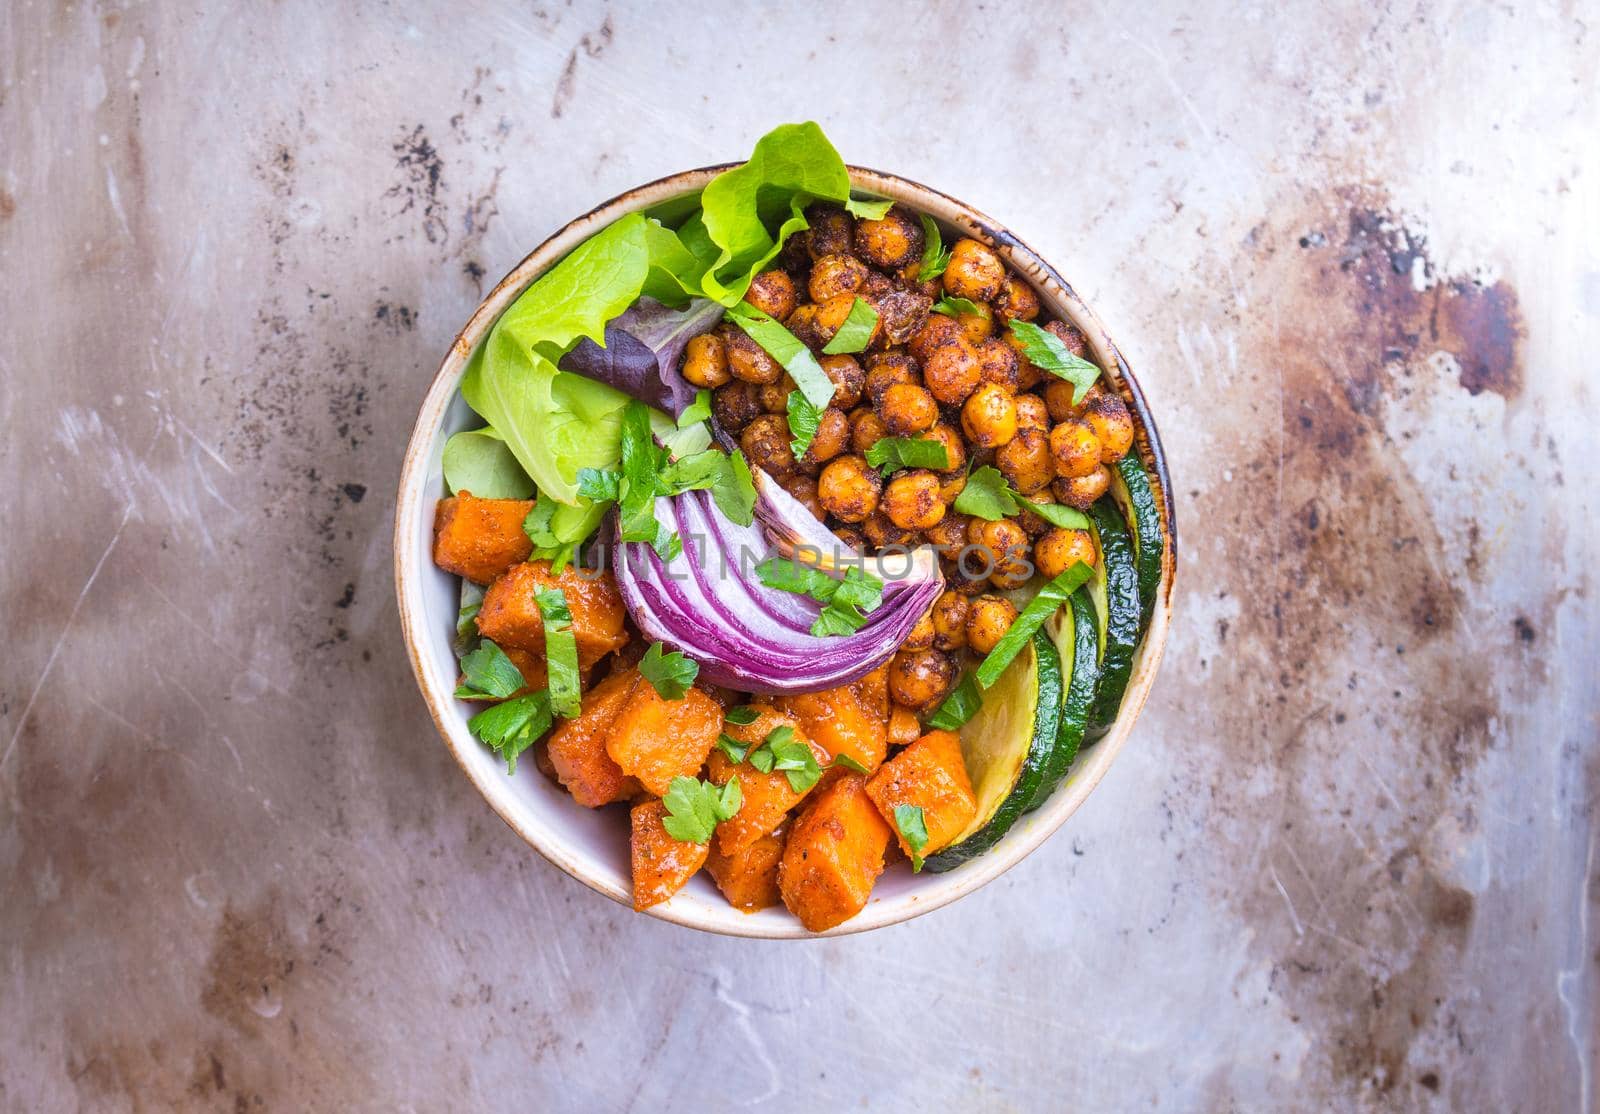 Healthy vegetarian salad with vegetables, sweet potato, chickpea, salad leaves. Healthy buddha bowl salad. Vegan/vegetarian food. Fresh lunch/dinner. Healthy eating concept. Top view. Iron background